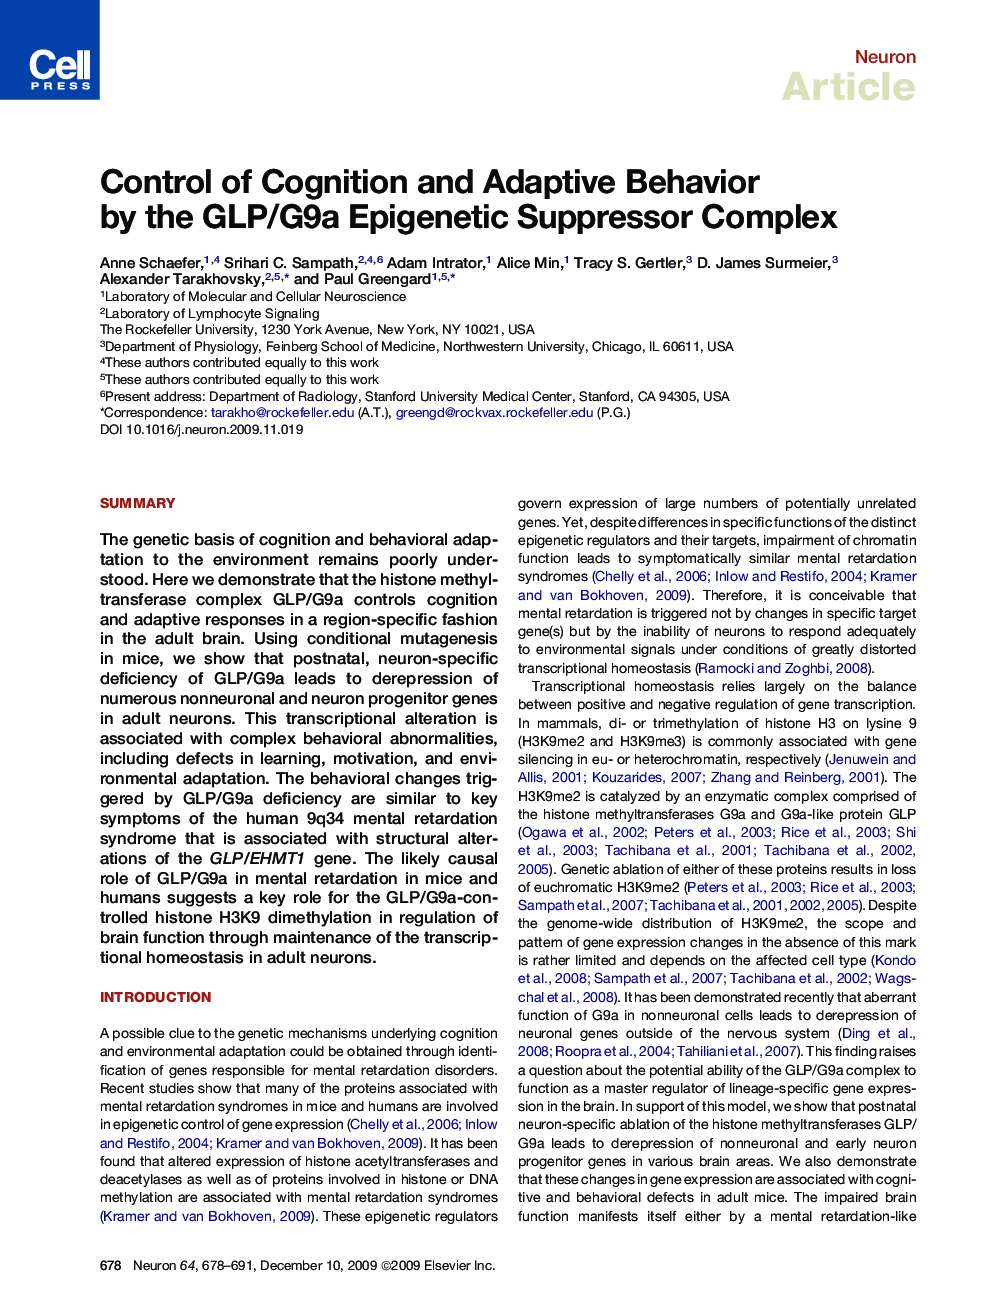 Control of Cognition and Adaptive Behavior by the GLP/G9a Epigenetic Suppressor Complex